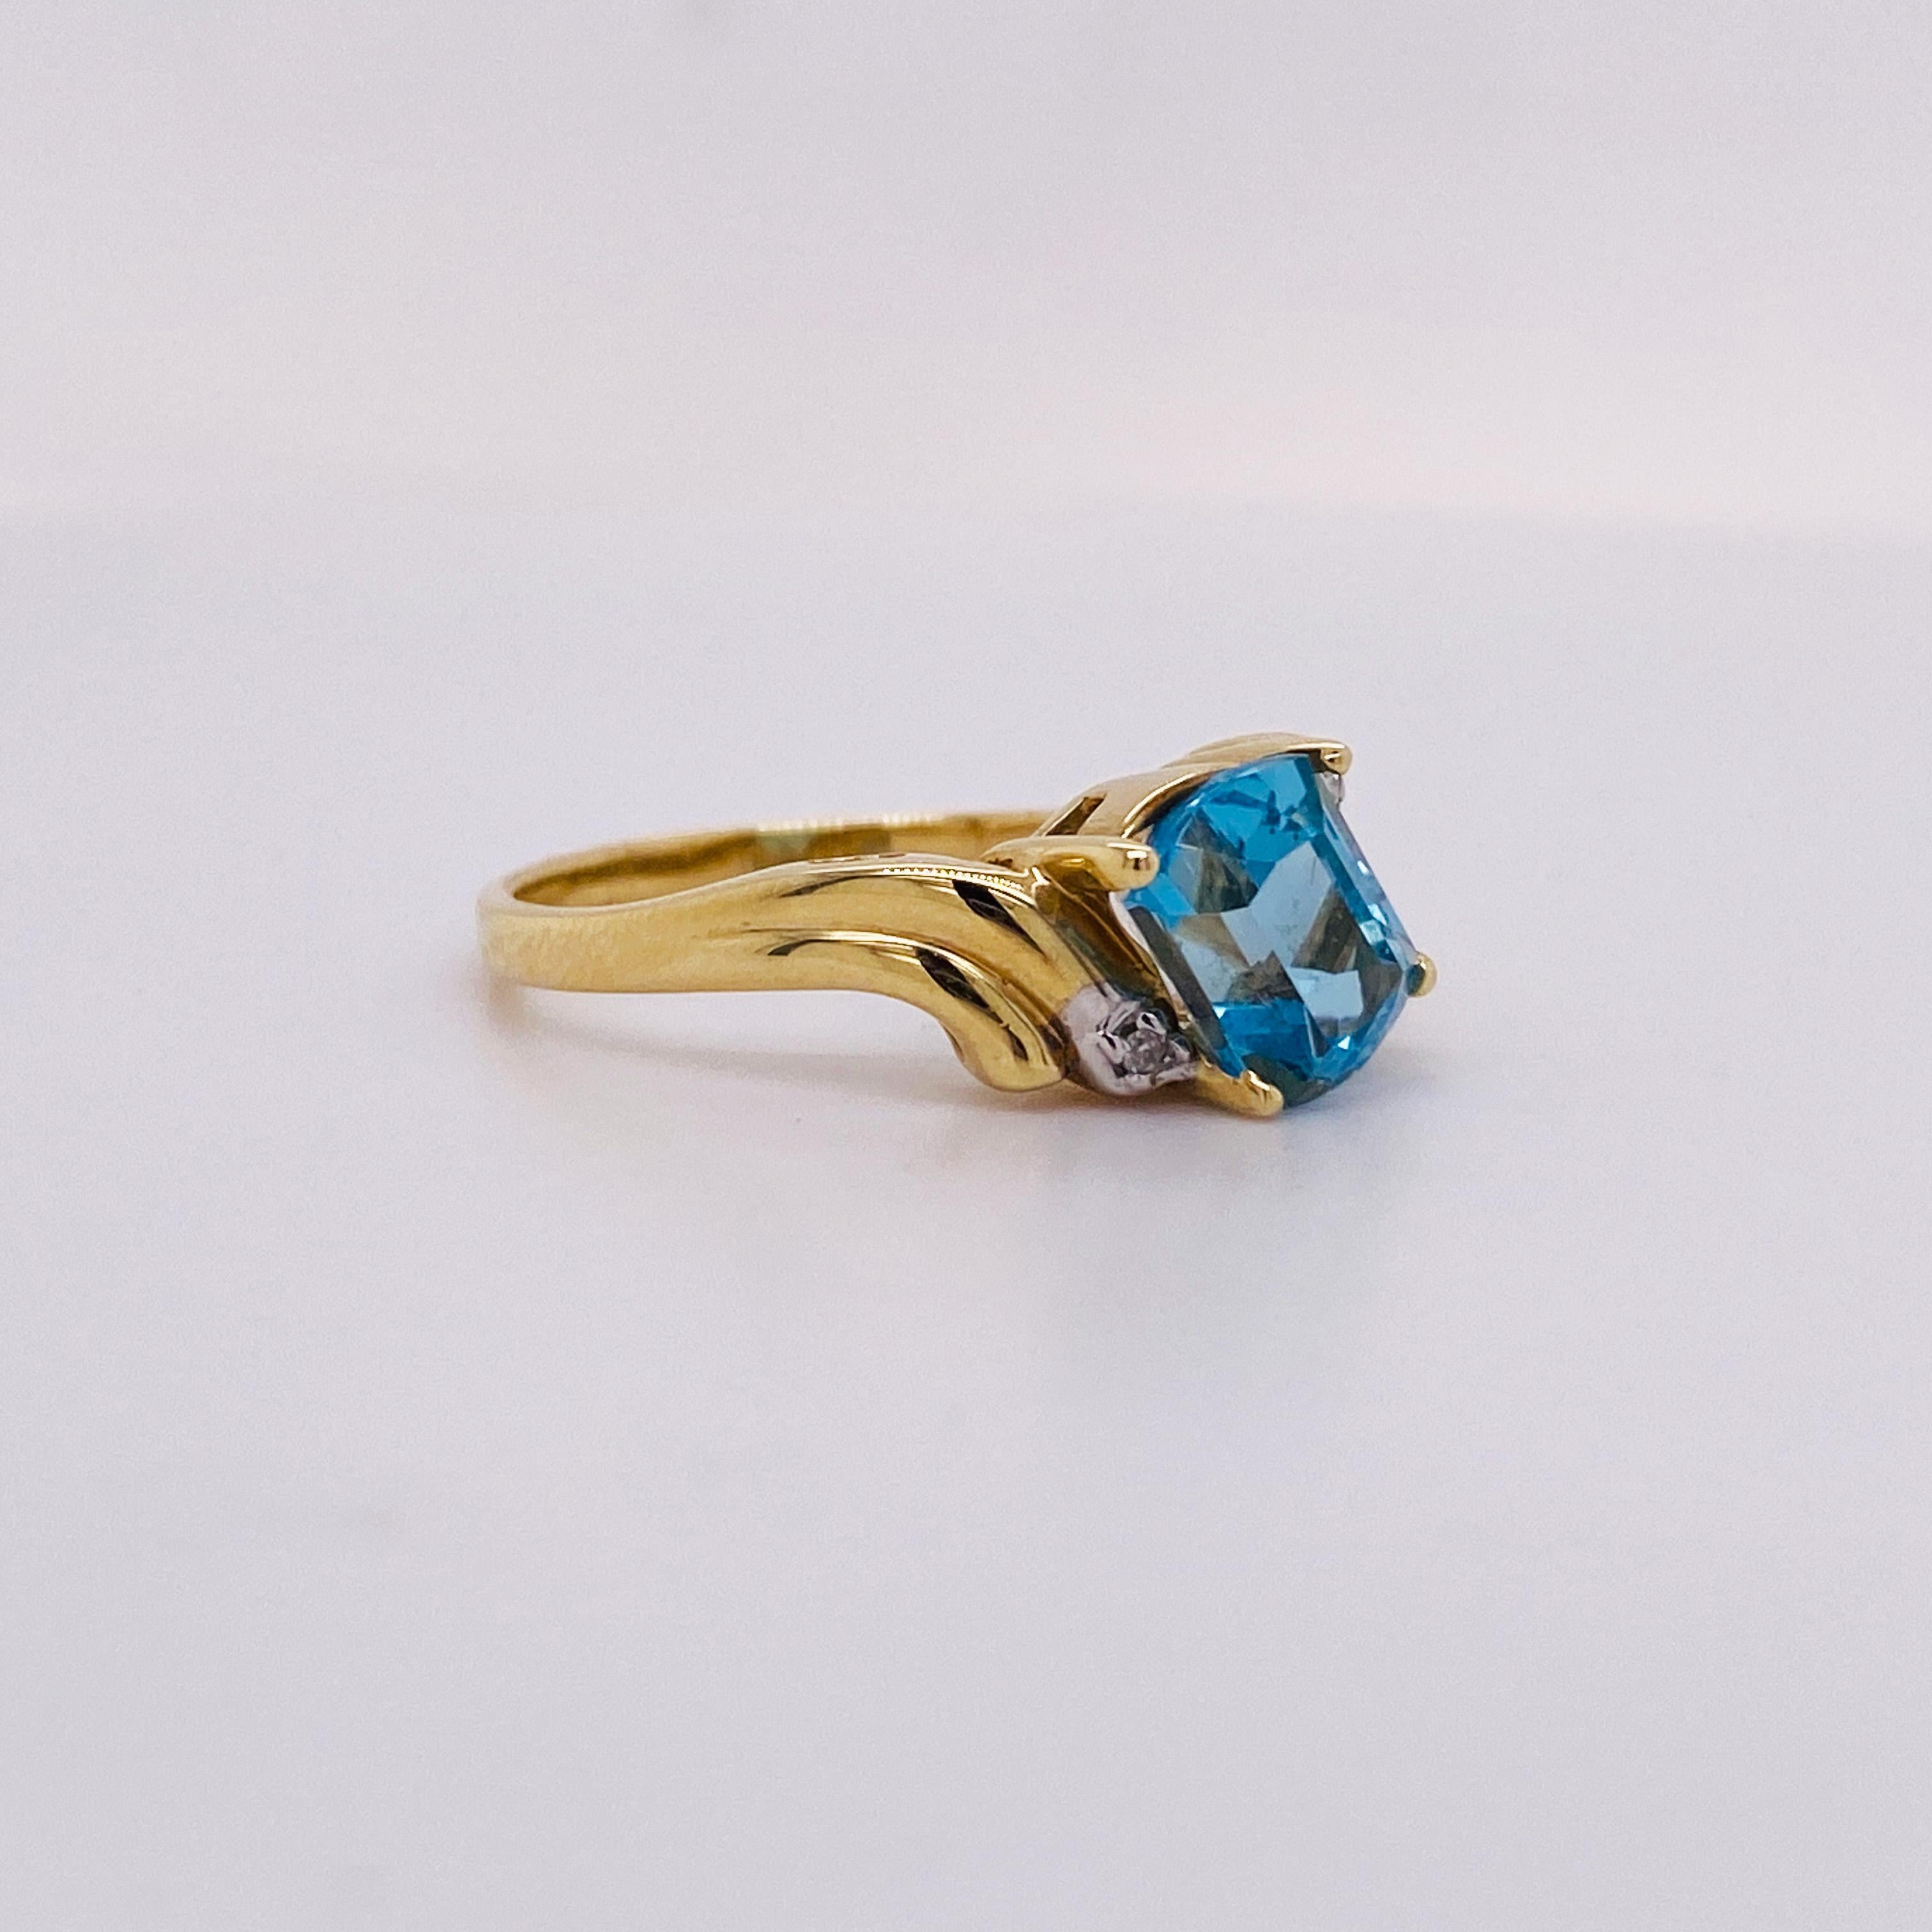 Contemporary 1.25 Carat Fancy Cut Blue Topaz, 14k Gold Bypass Ring with Diamond Accents For Sale